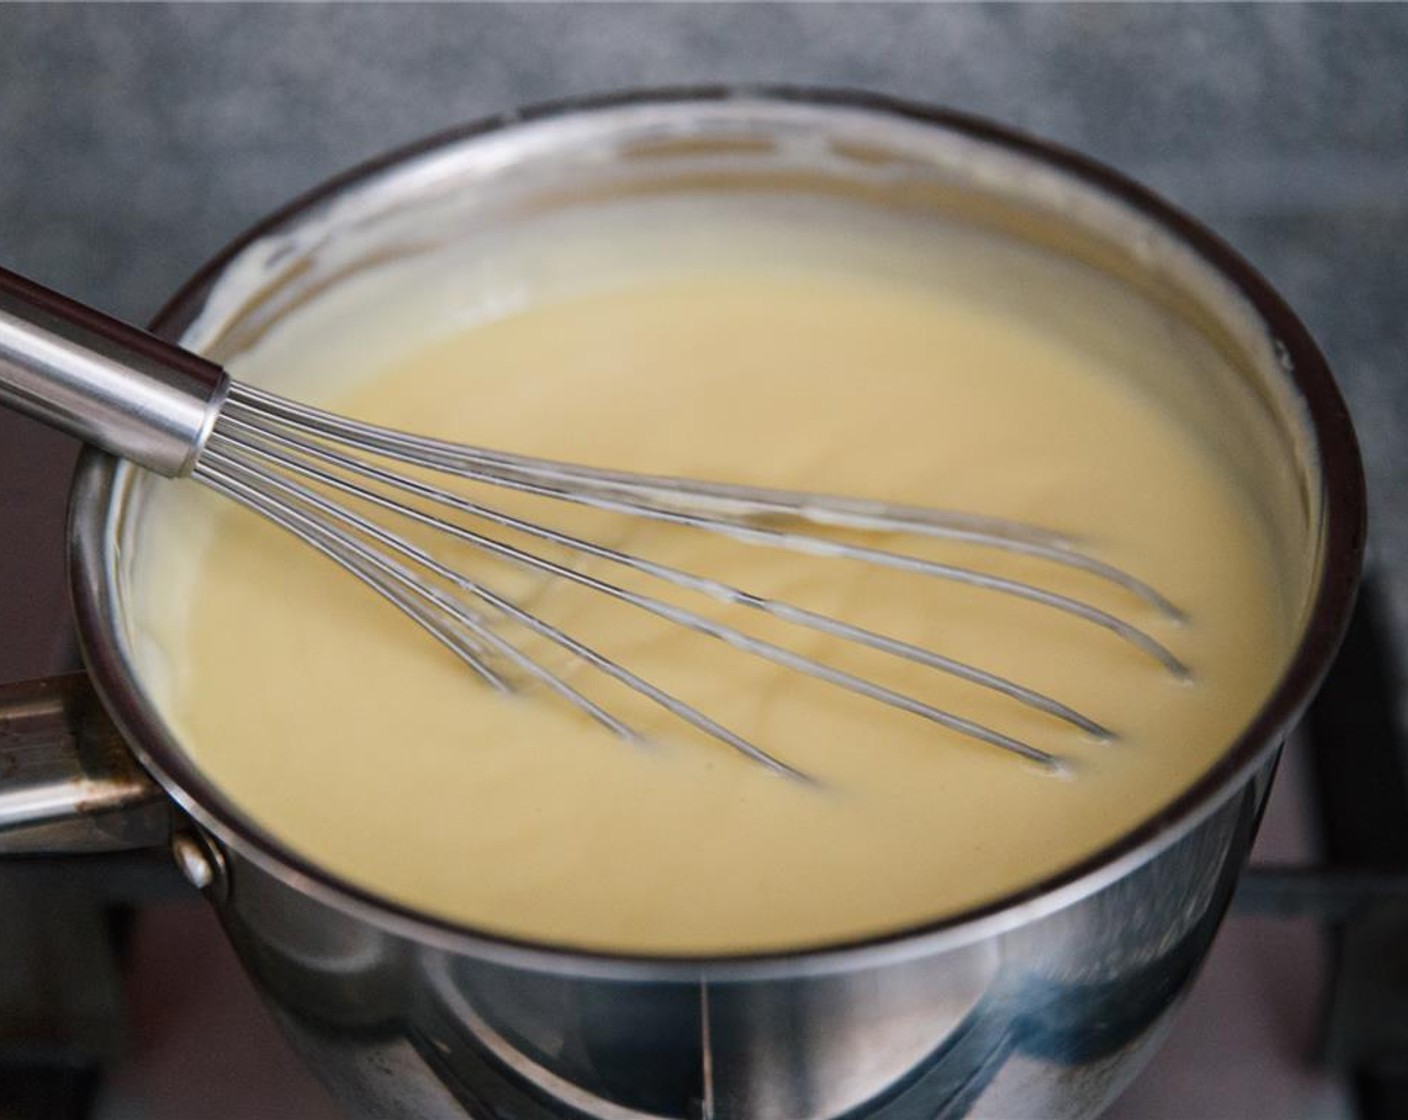 step 6 Continue to whisk, making sure to cook slowly until the custard mixture has thickened. This should take about 10 minutes. Remove from the heat.